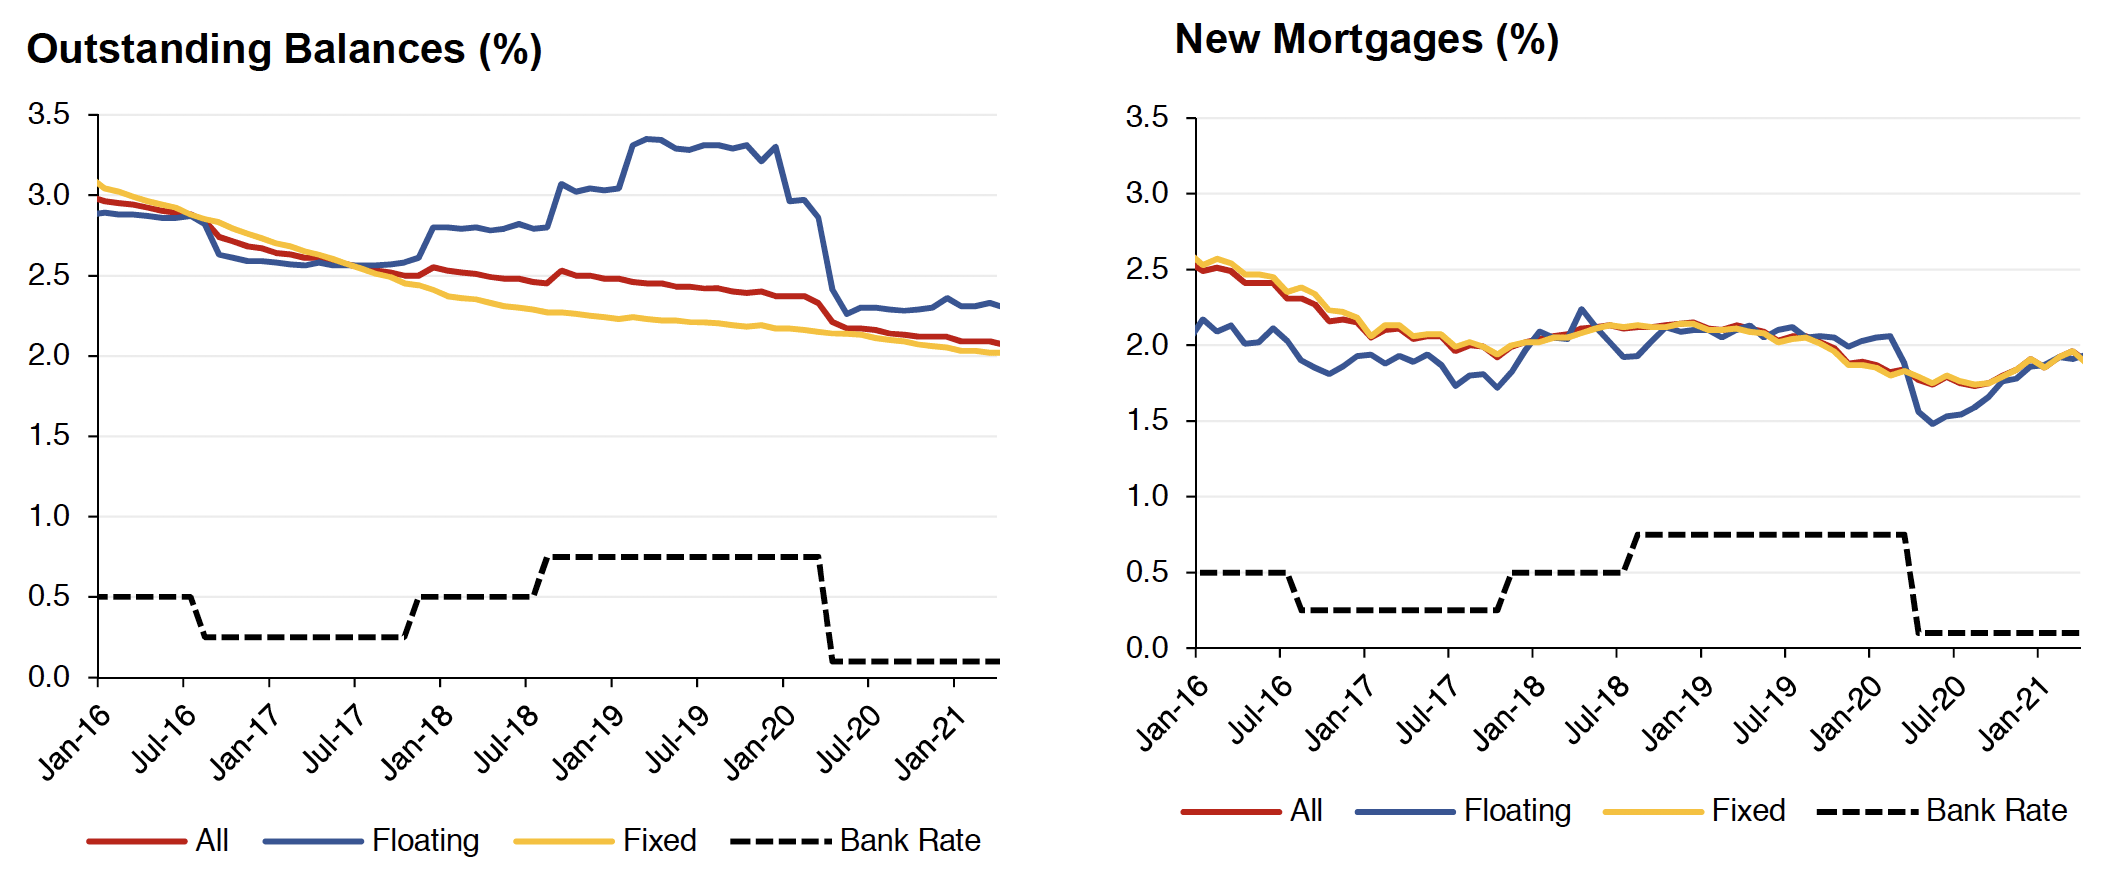 Chart 4.5 shows how the effective mortgage interest rate on a monthly basis has progressed for outstanding mortgages, split into floating rate mortgages, fixed rate mortgages, all mortgages and the bank rate is included to show how this interacts with mortgage rates. This covers the period from January 2016 to March 2021.
										 Chart 4.6 displays how the effective mortgage interest rate on a monthly basis has progressed for new mortgages, split into floating rate mortgages, fixed rate mortgages, all mortgages and the bank rate is included to show how this interacts with mortgage rates. This covers the period from January 2016 to March 2021.